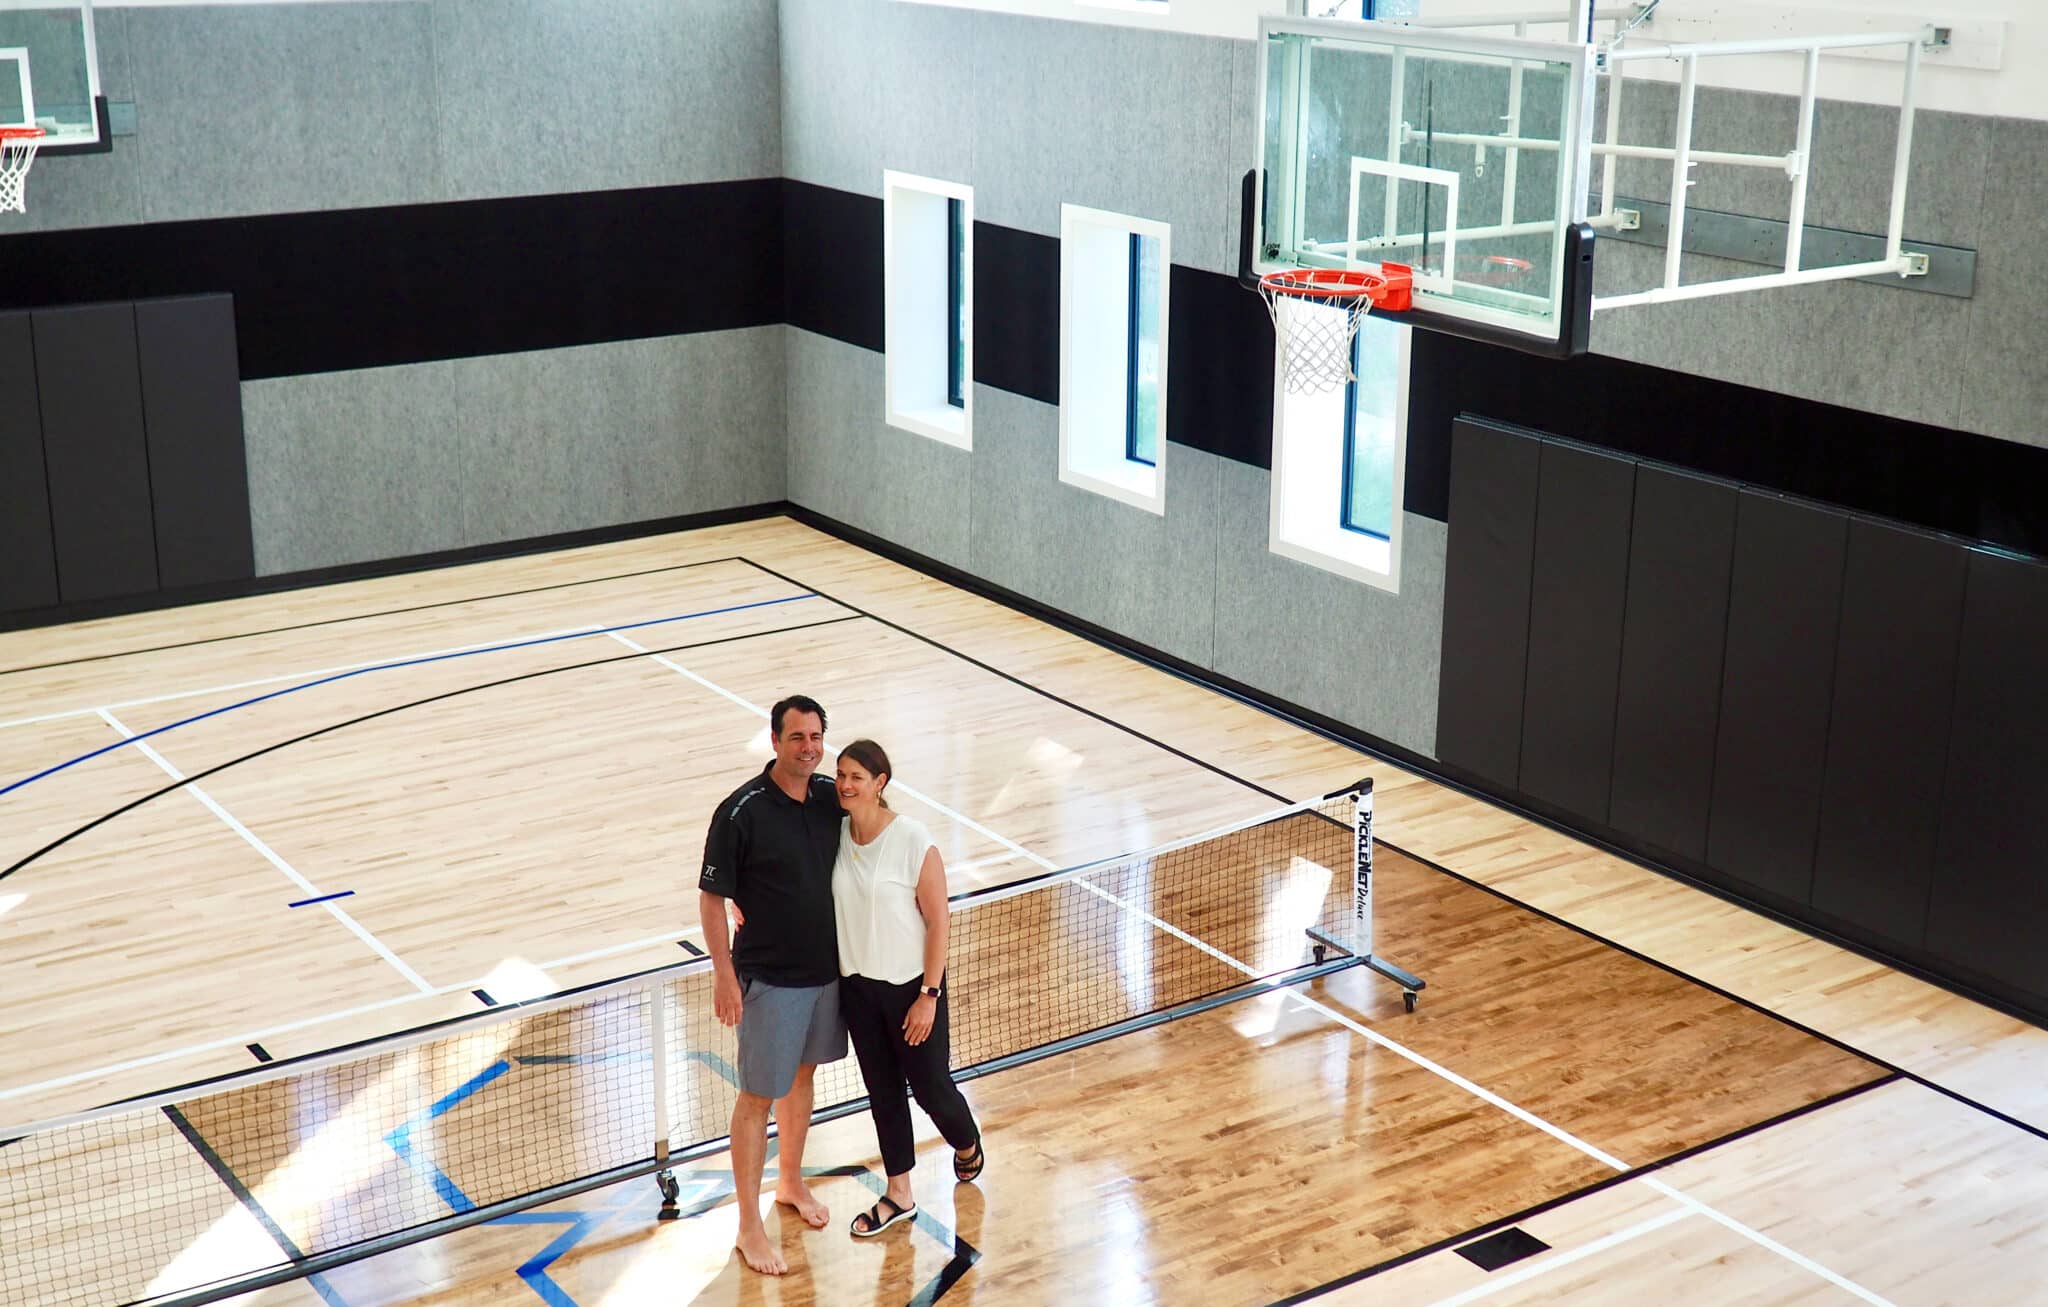 Parker dream home has basketball court and slide